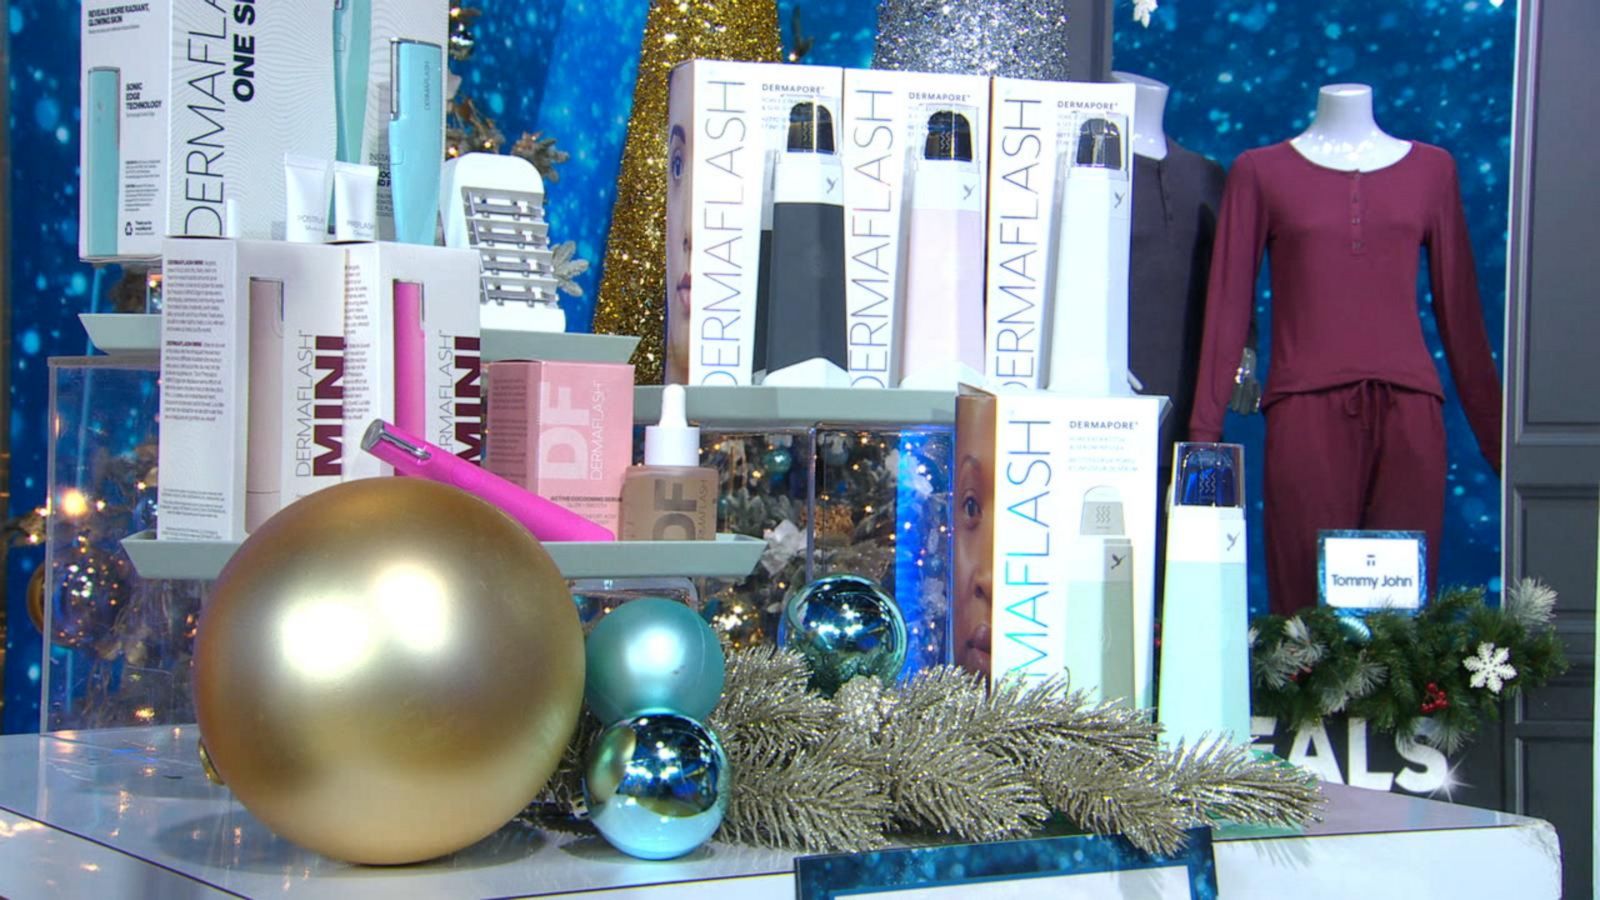 'GMA' Deals and Steals on gifts for everyone Good Morning America